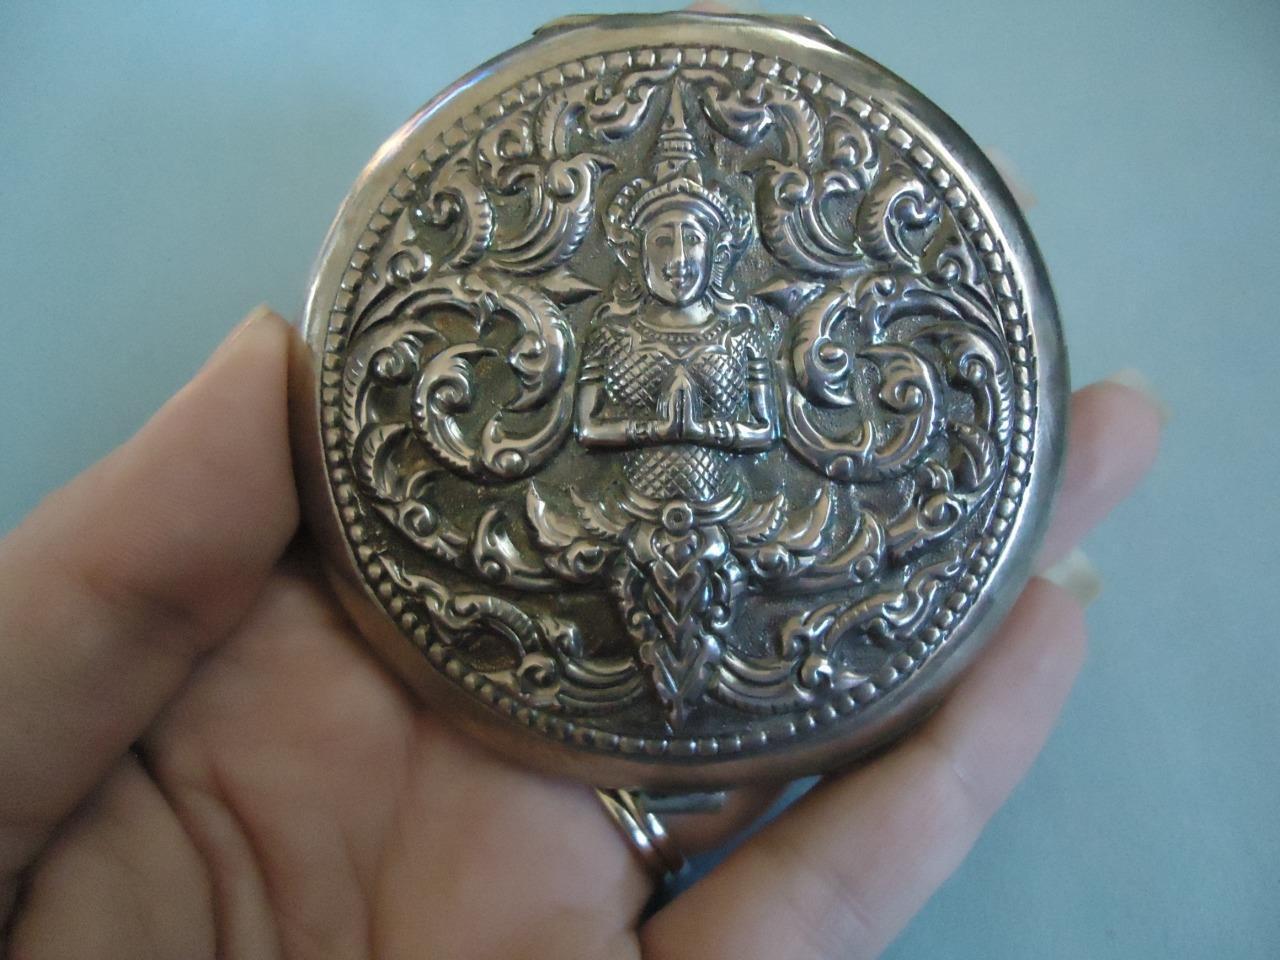 STUNNING VINTAGE STERLING SILVER SIAM DANCING GODDESS COMPACT WITH MIRROR